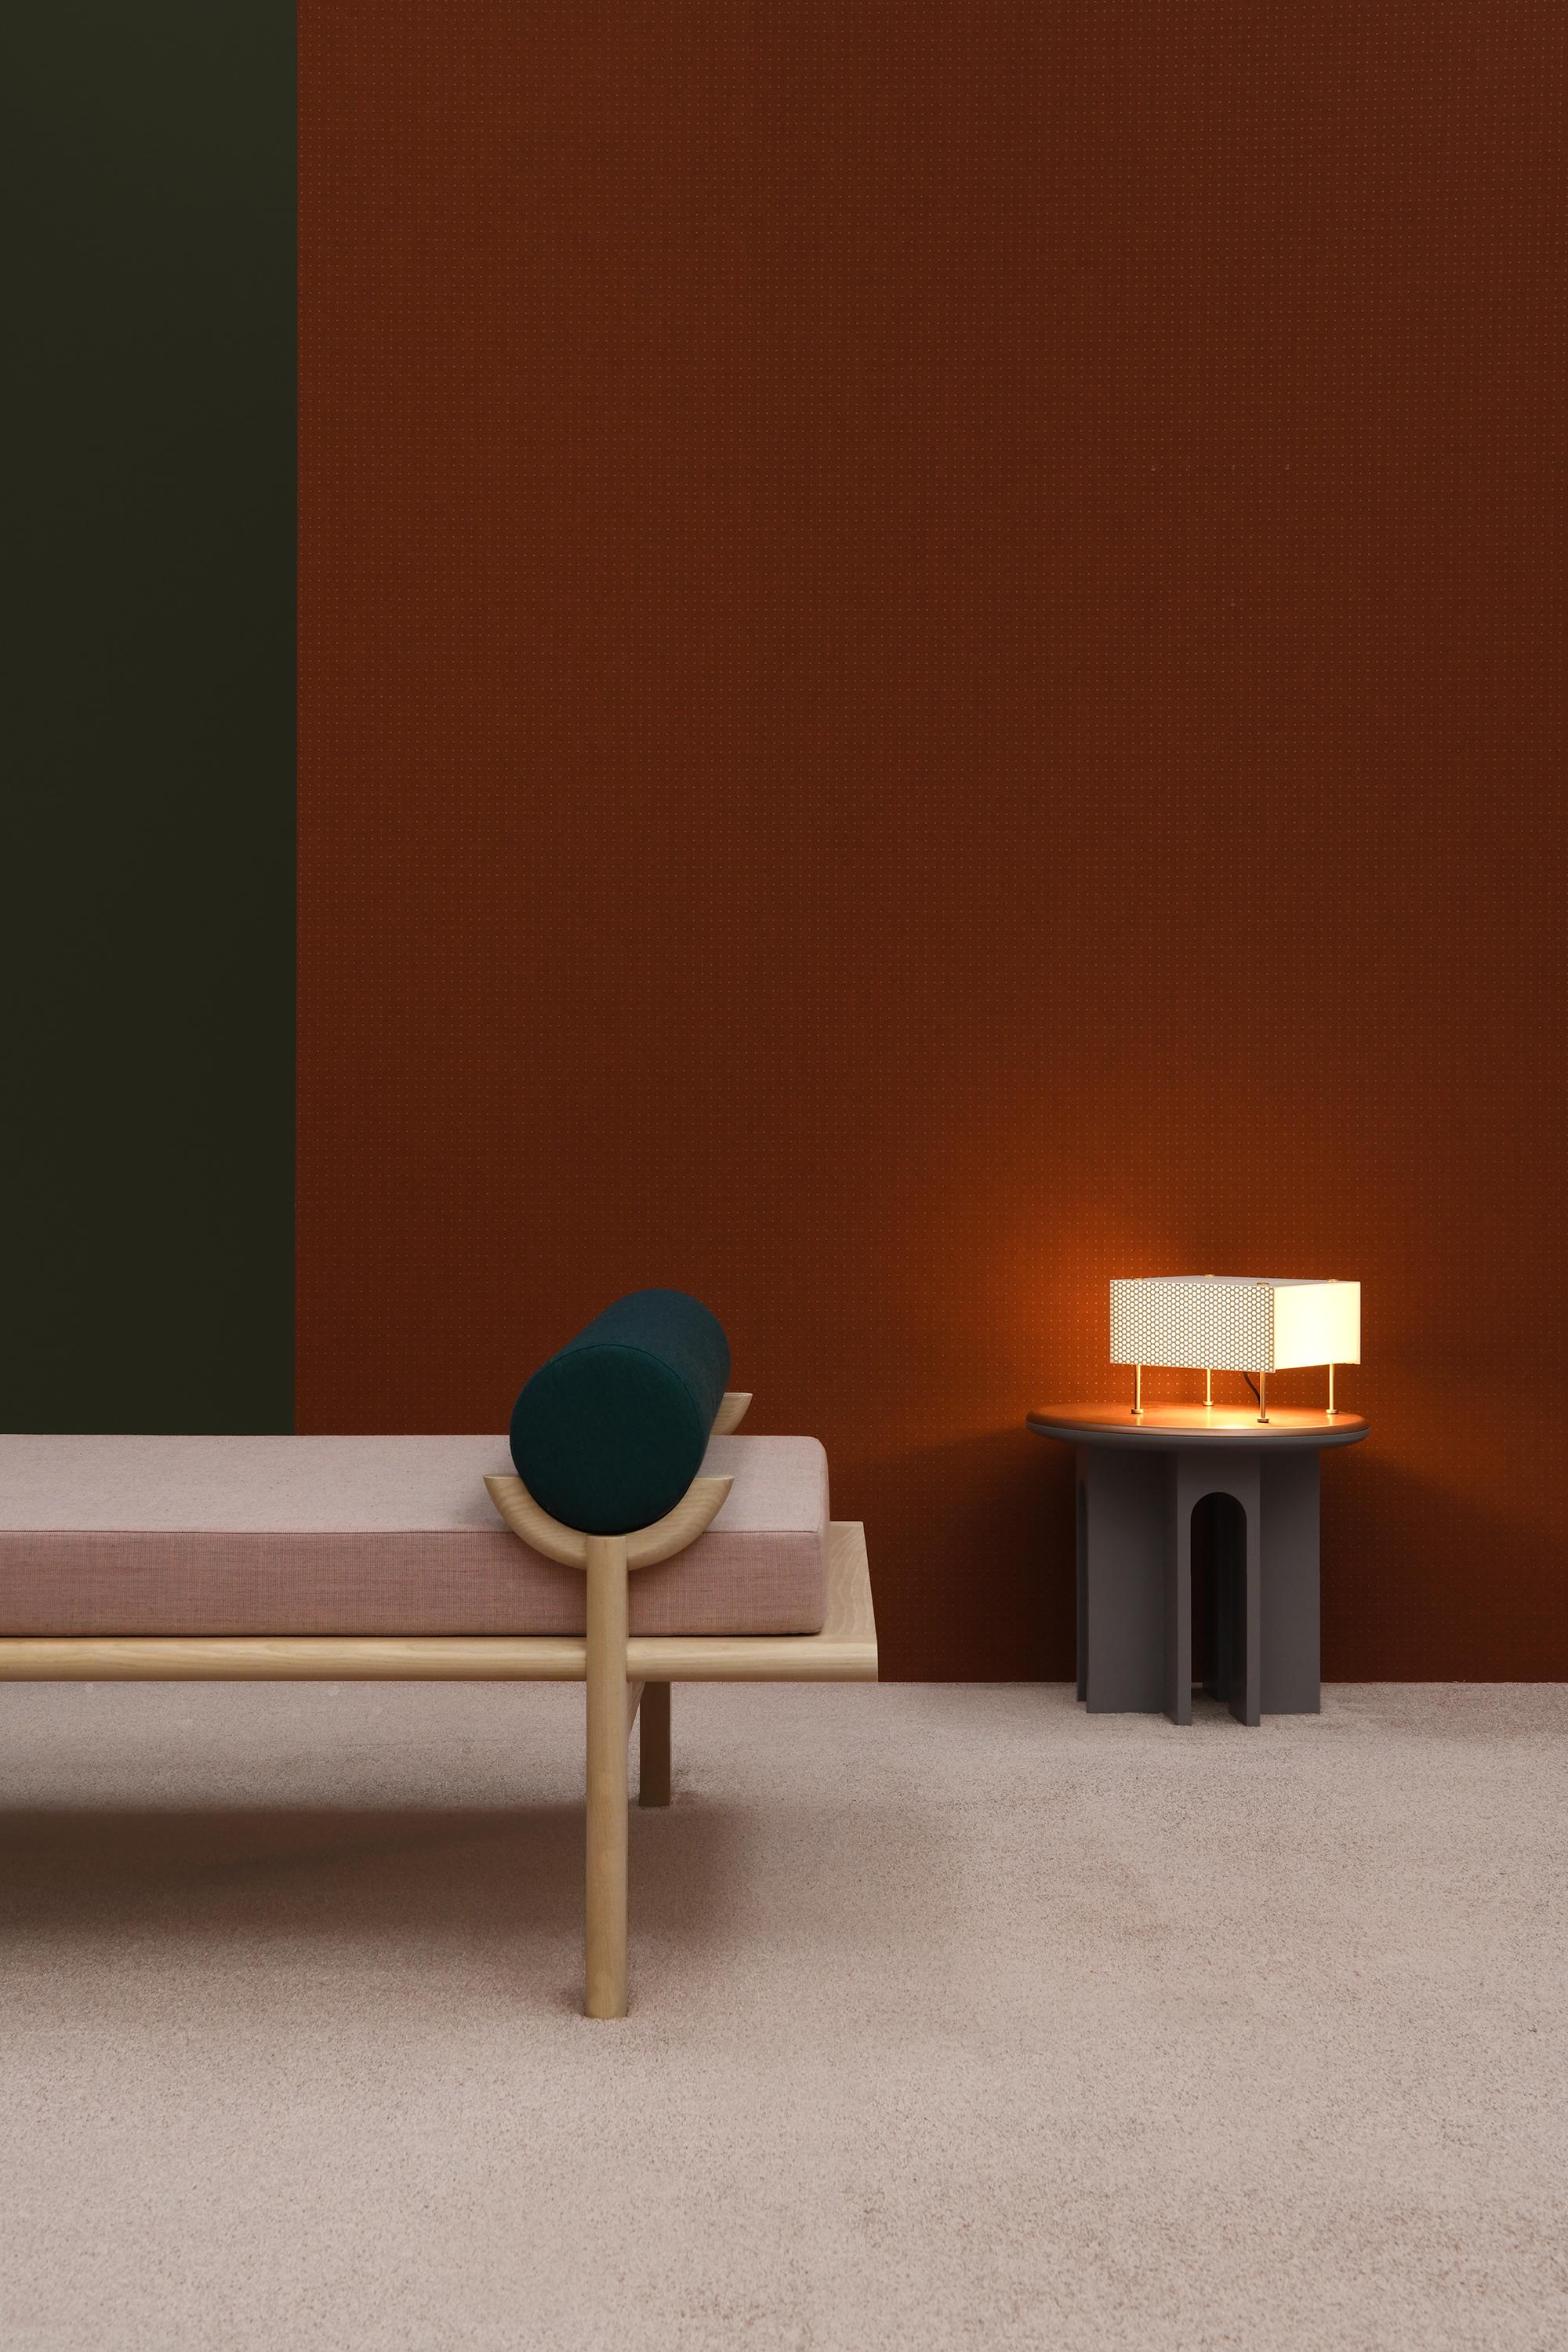 Pierre Guariche 'G61' table lamp for Sammode Studio. 

Originally designed by Pierre Guariche, this iconic luminaire is a newly produced authorized re-edition by Sammode Studio in France embracing many of the same small-scale manufacturing